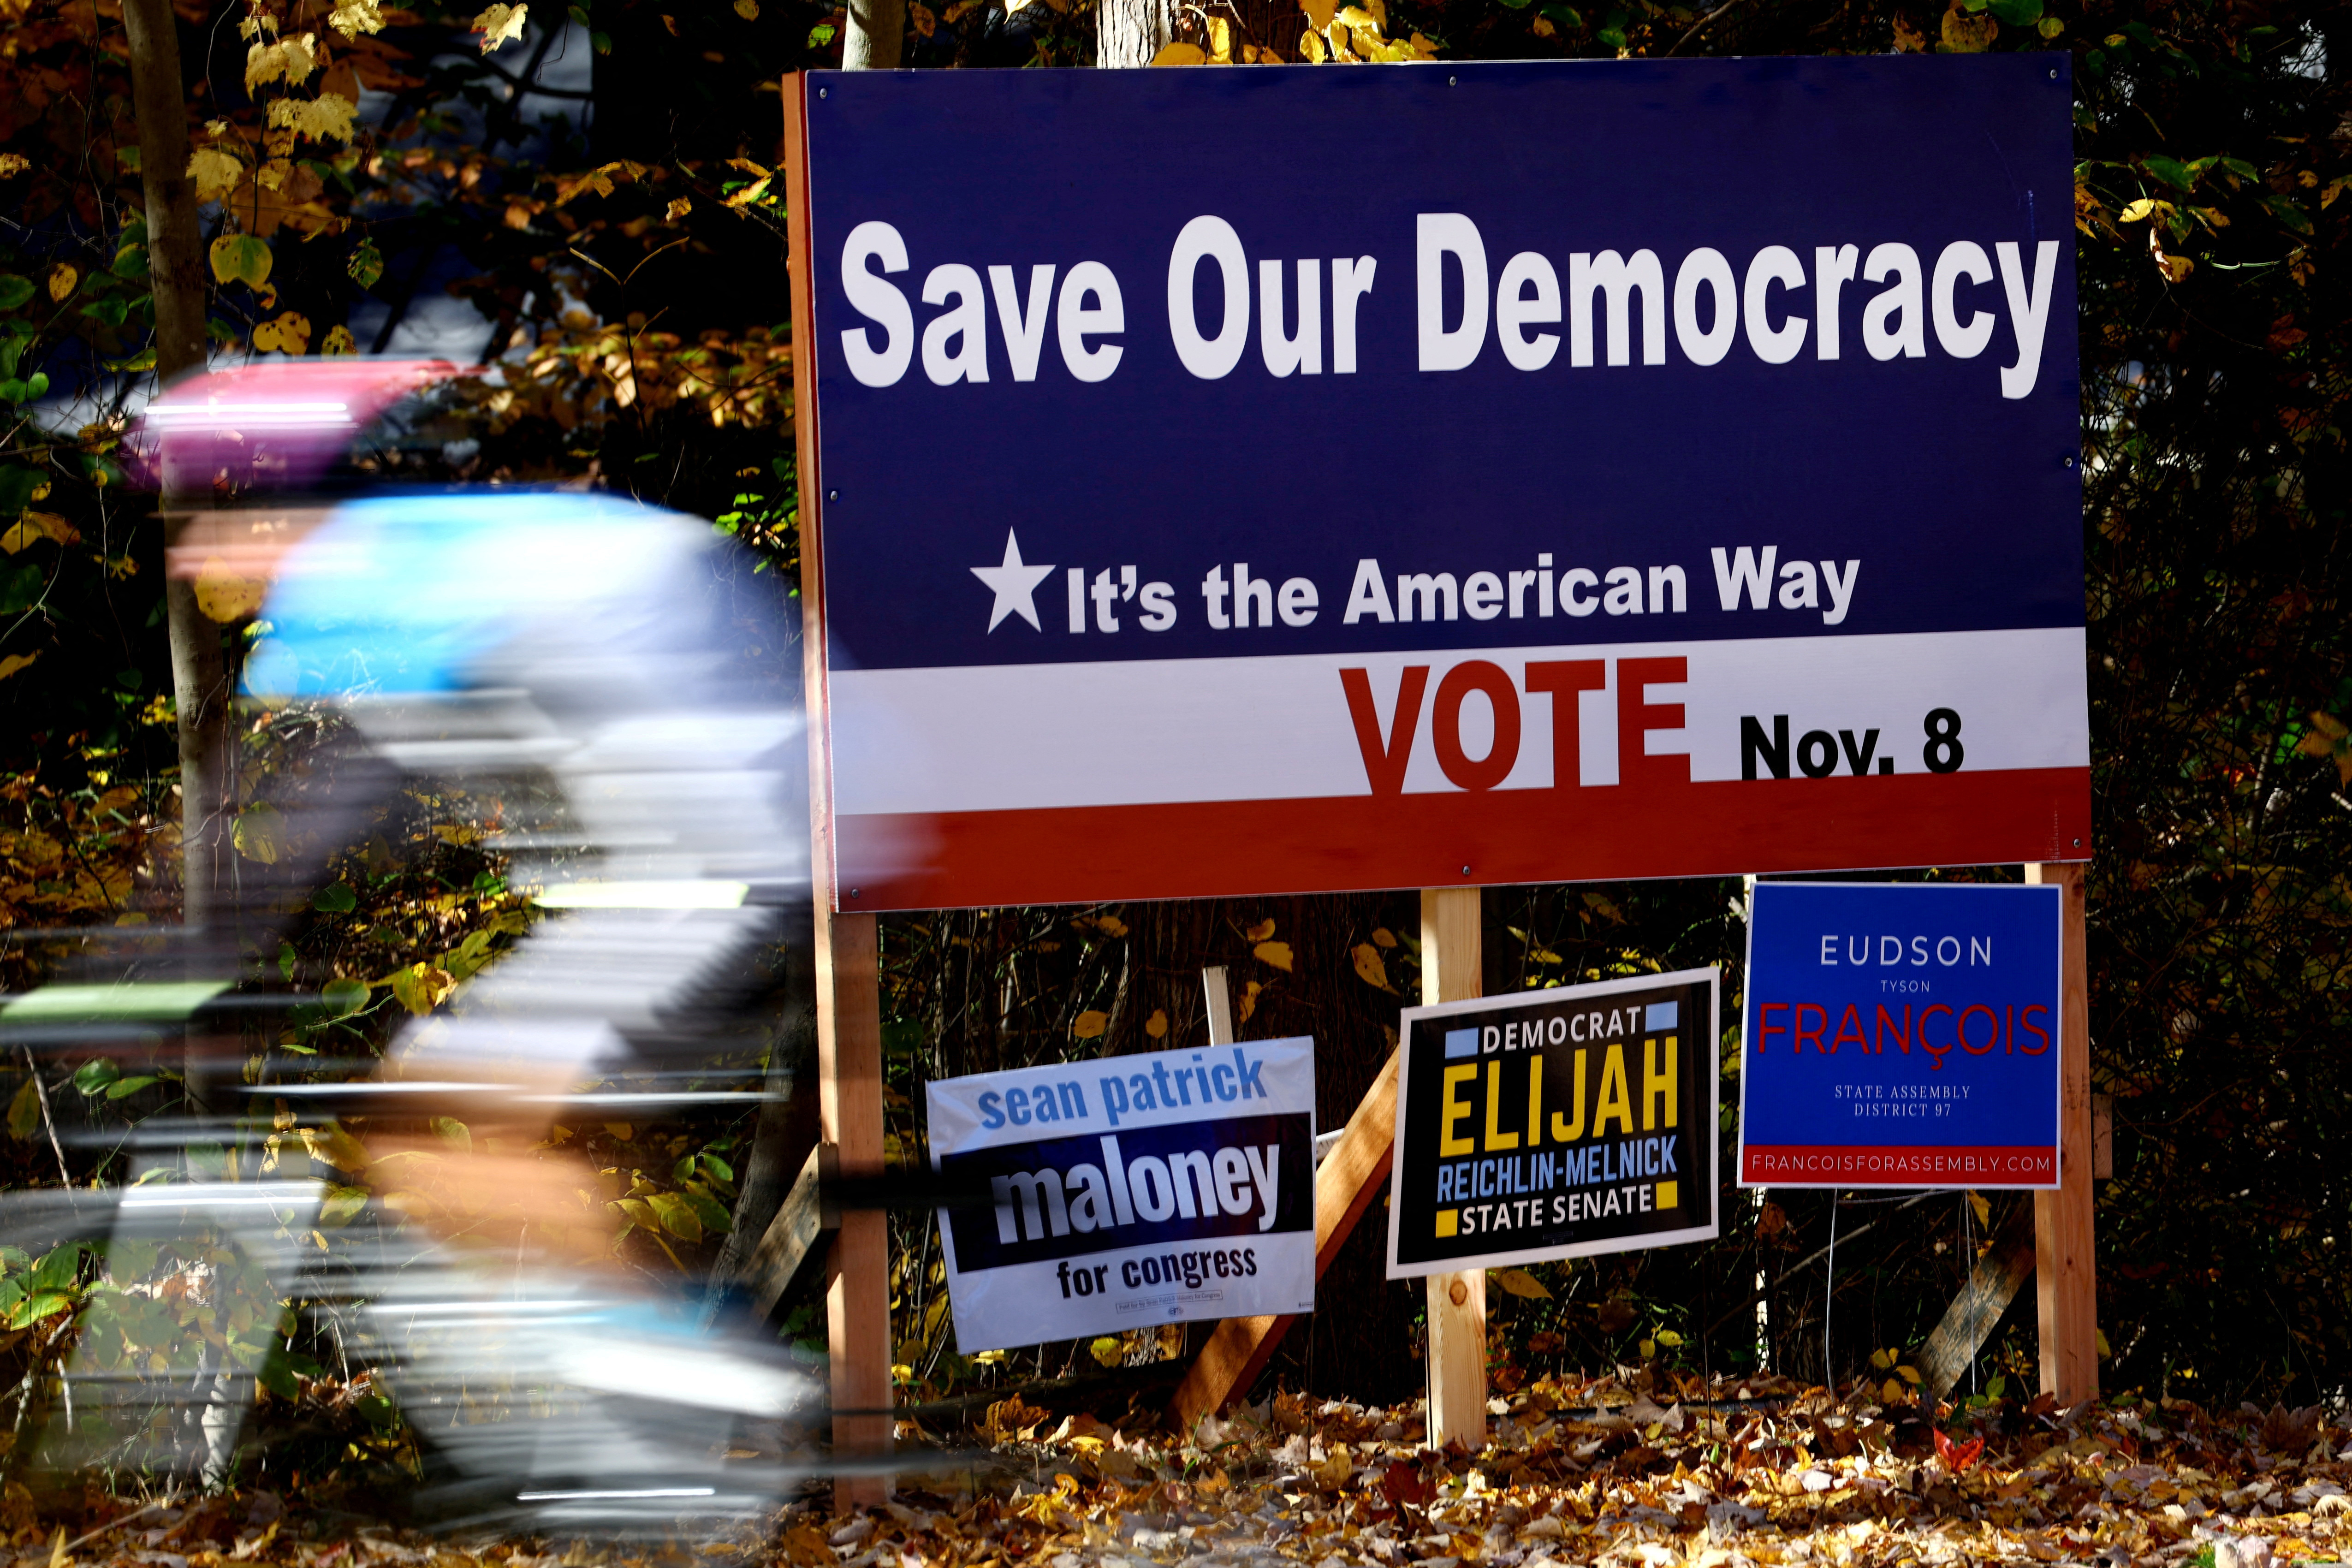 Political signs ahead of the November 8 U.S. midterm elections in Palisades, New York